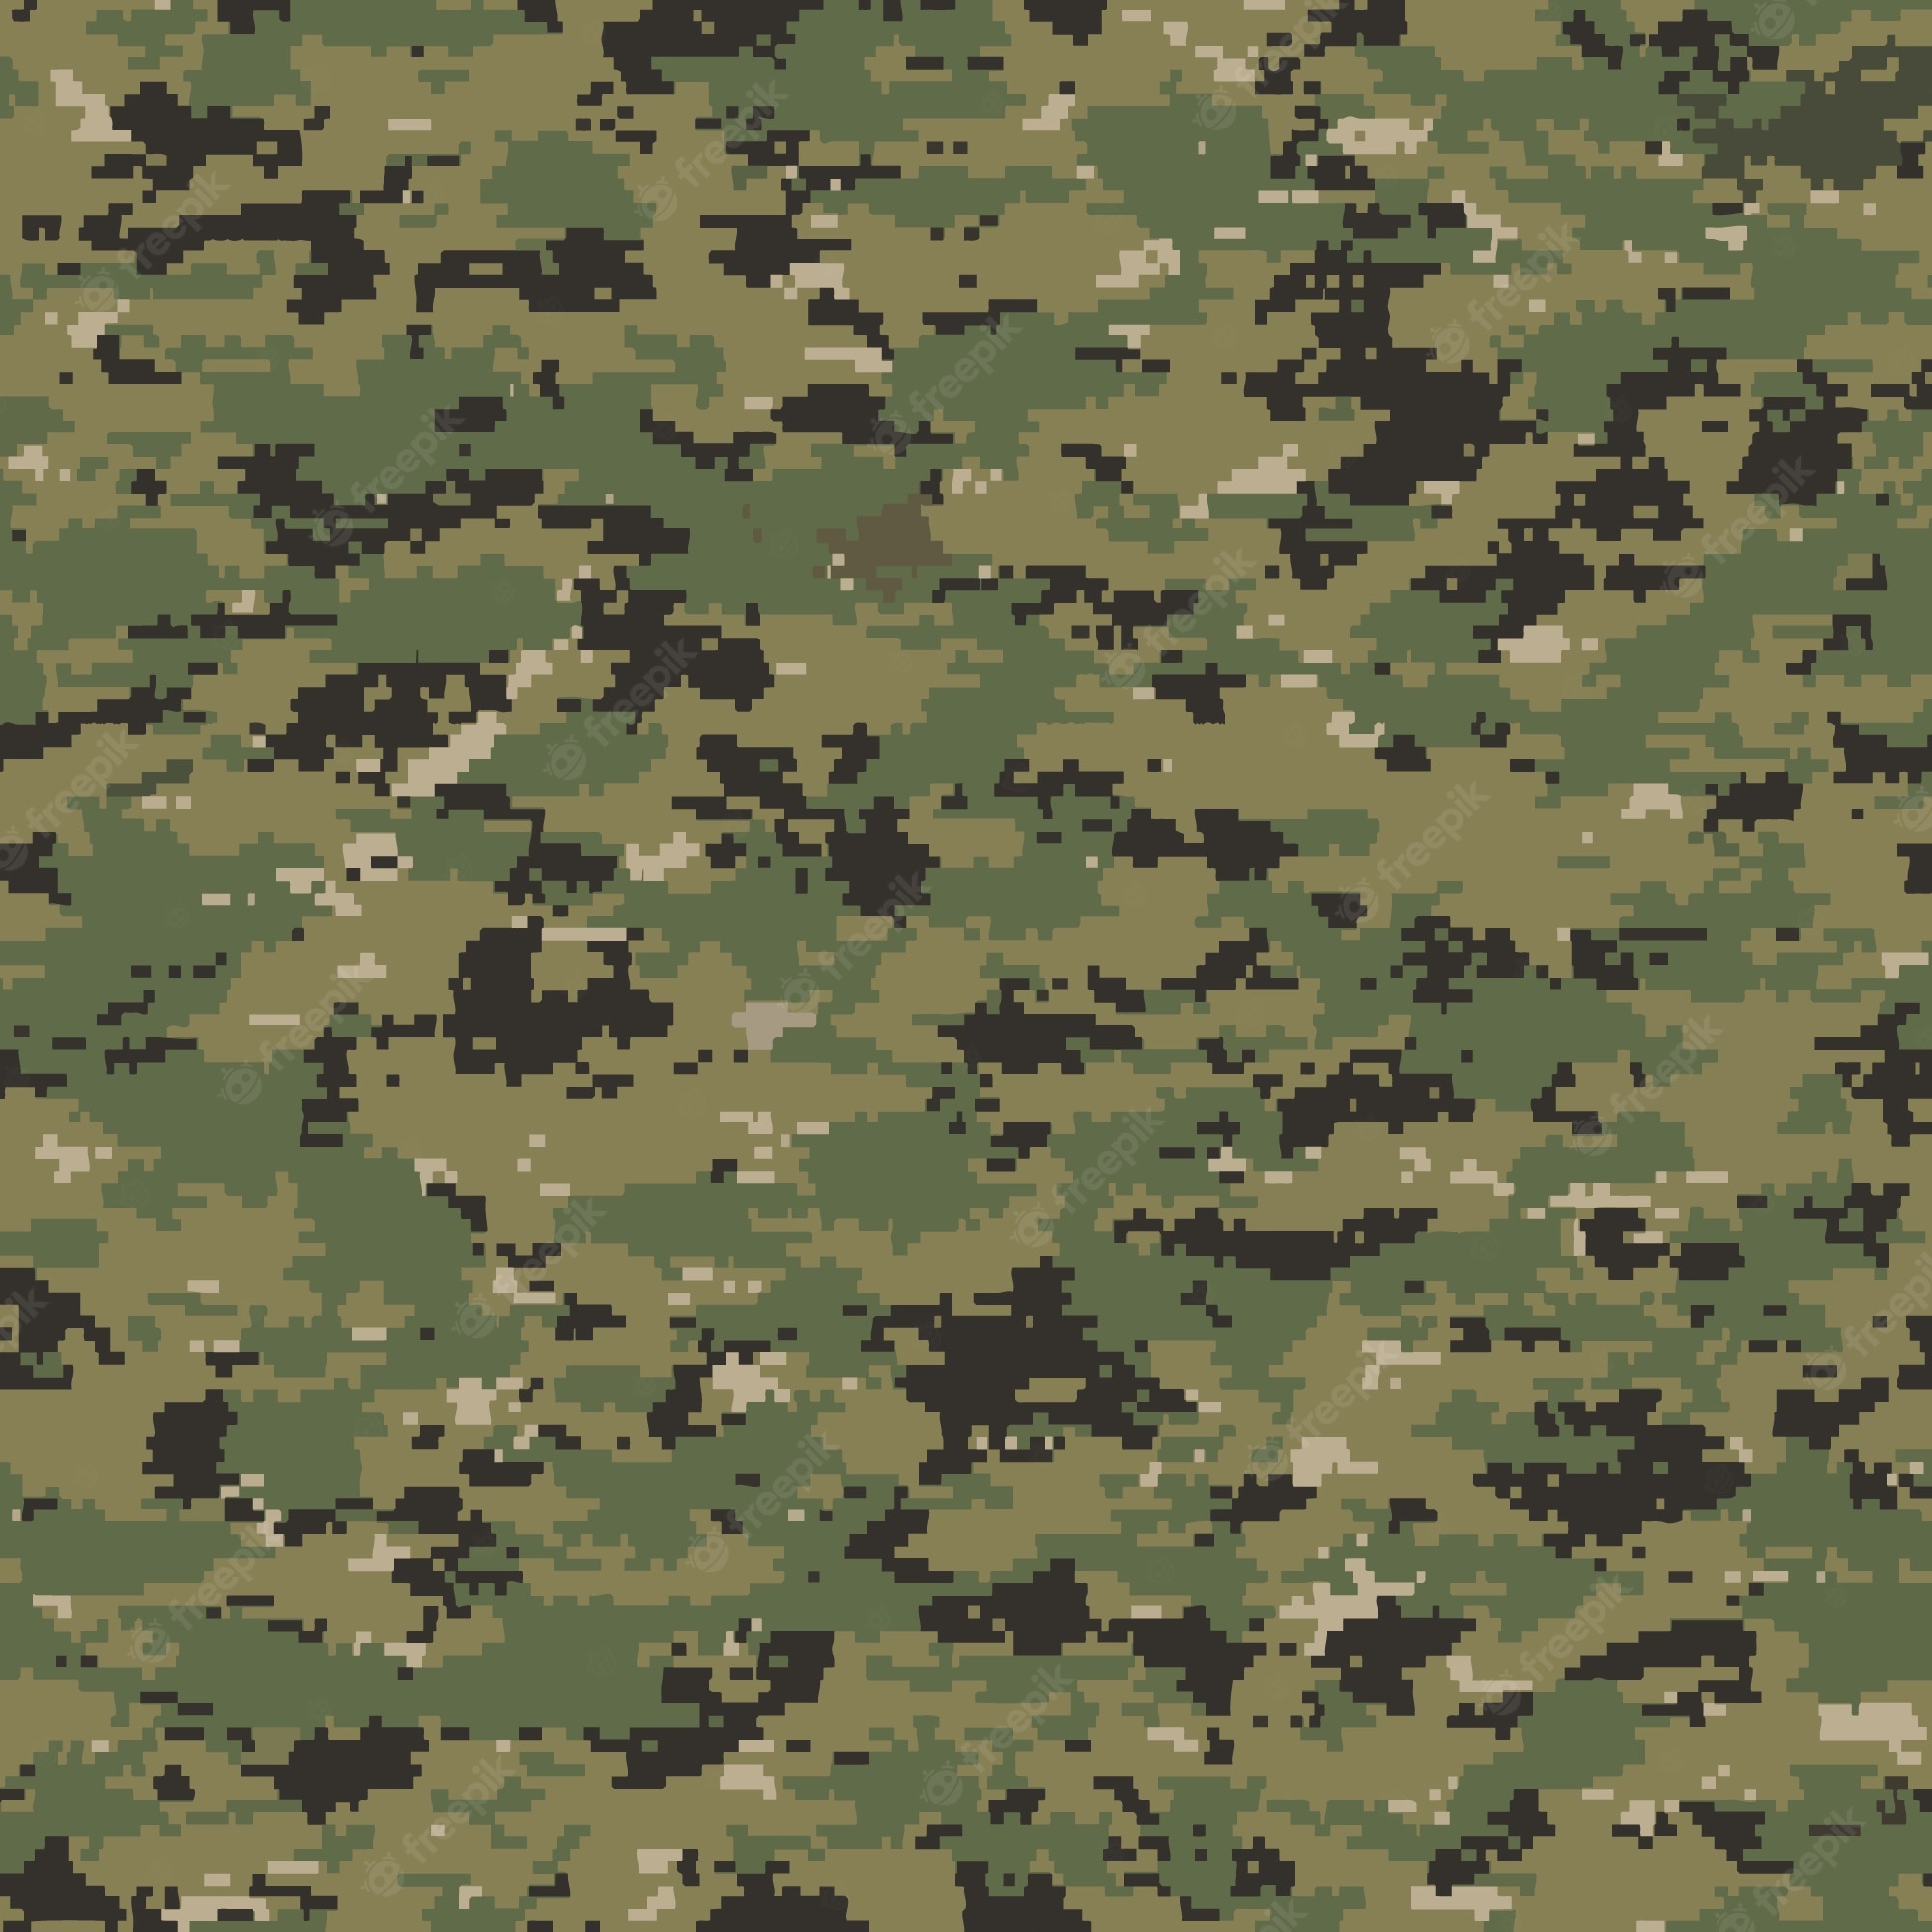 Camouflage camo pattern Image. Free Vectors, & PSD